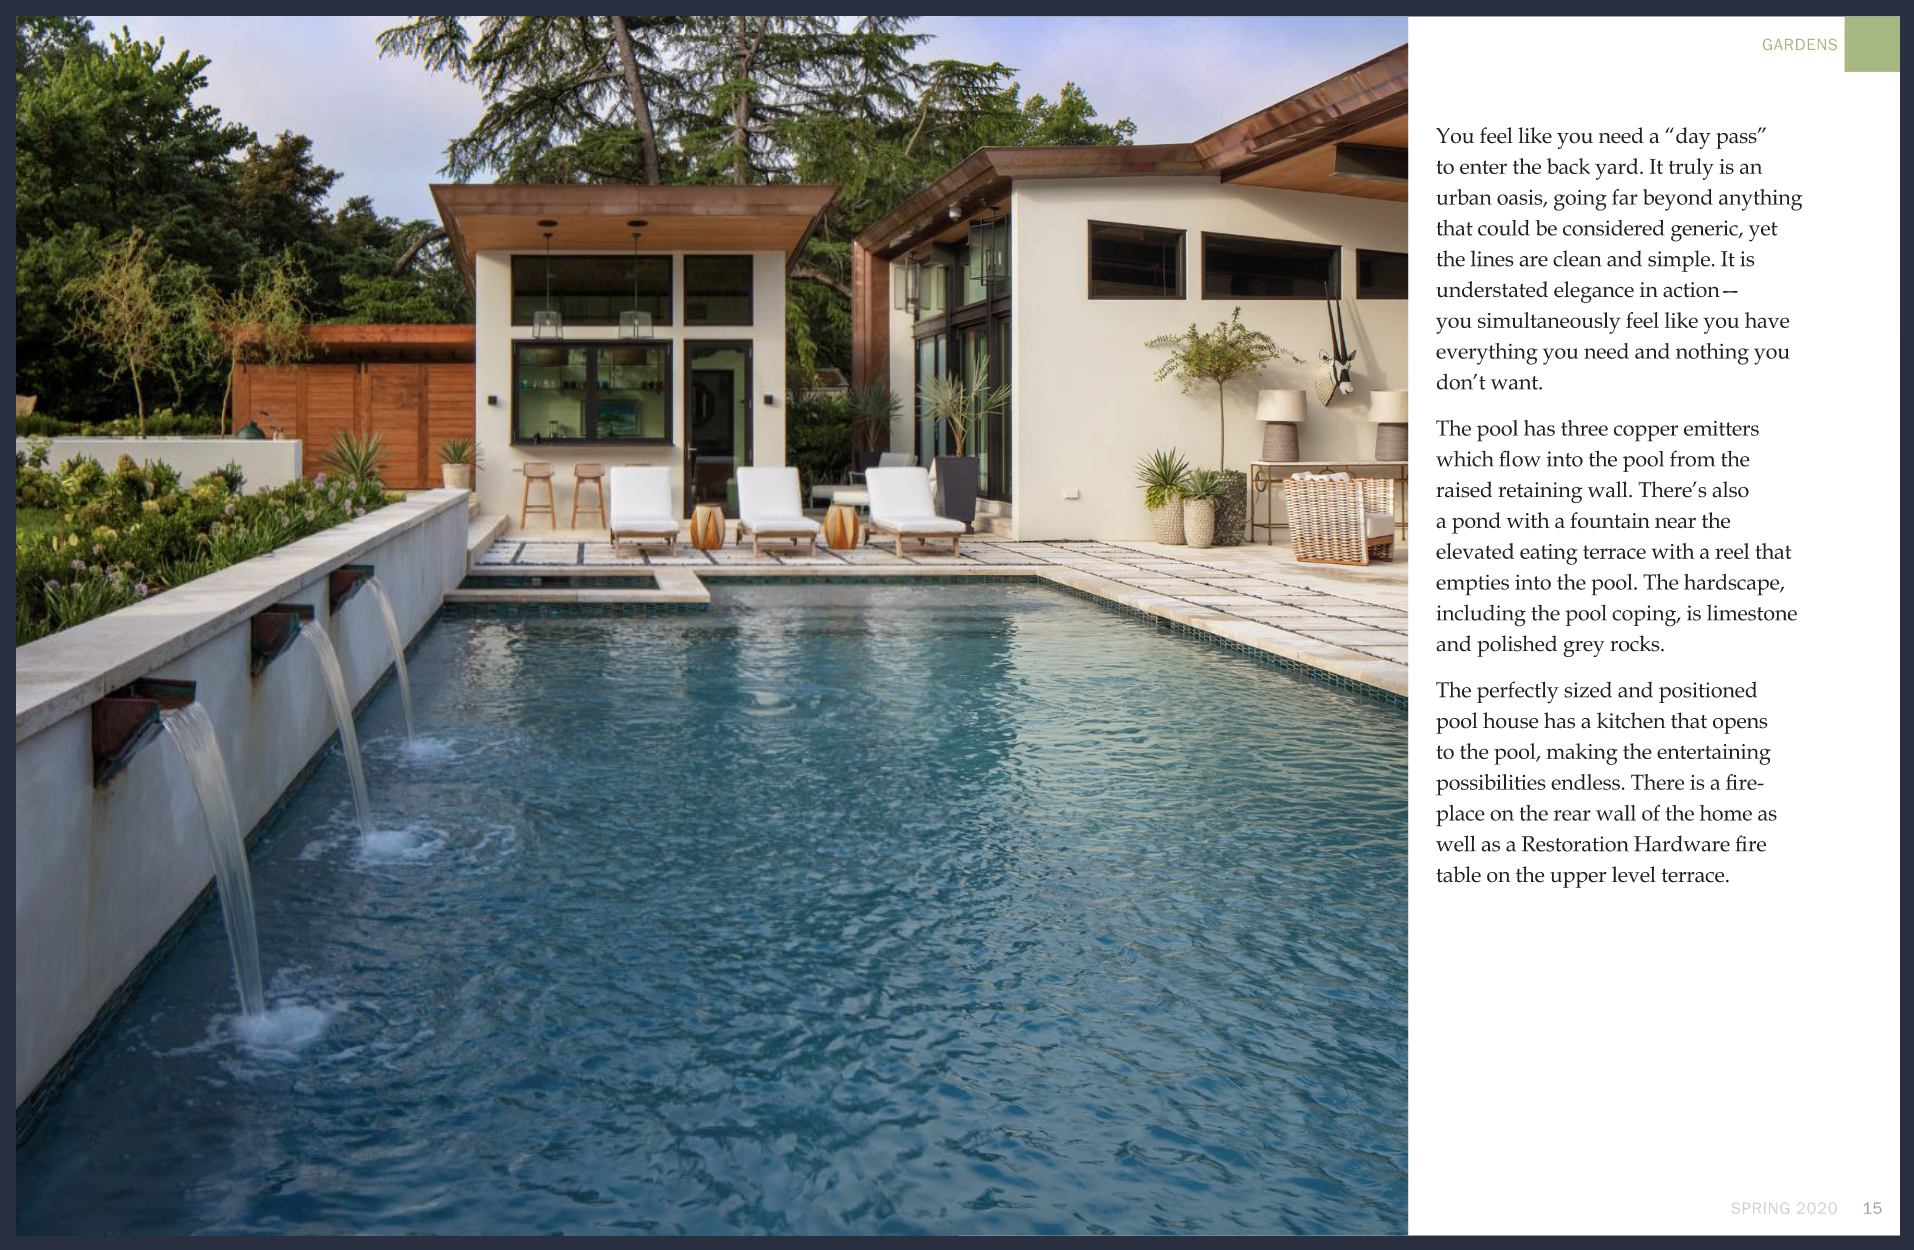 Retaining wall for elegant pool | Copper emitters for waterfall | Marcia Fryer Landscape Designs.png